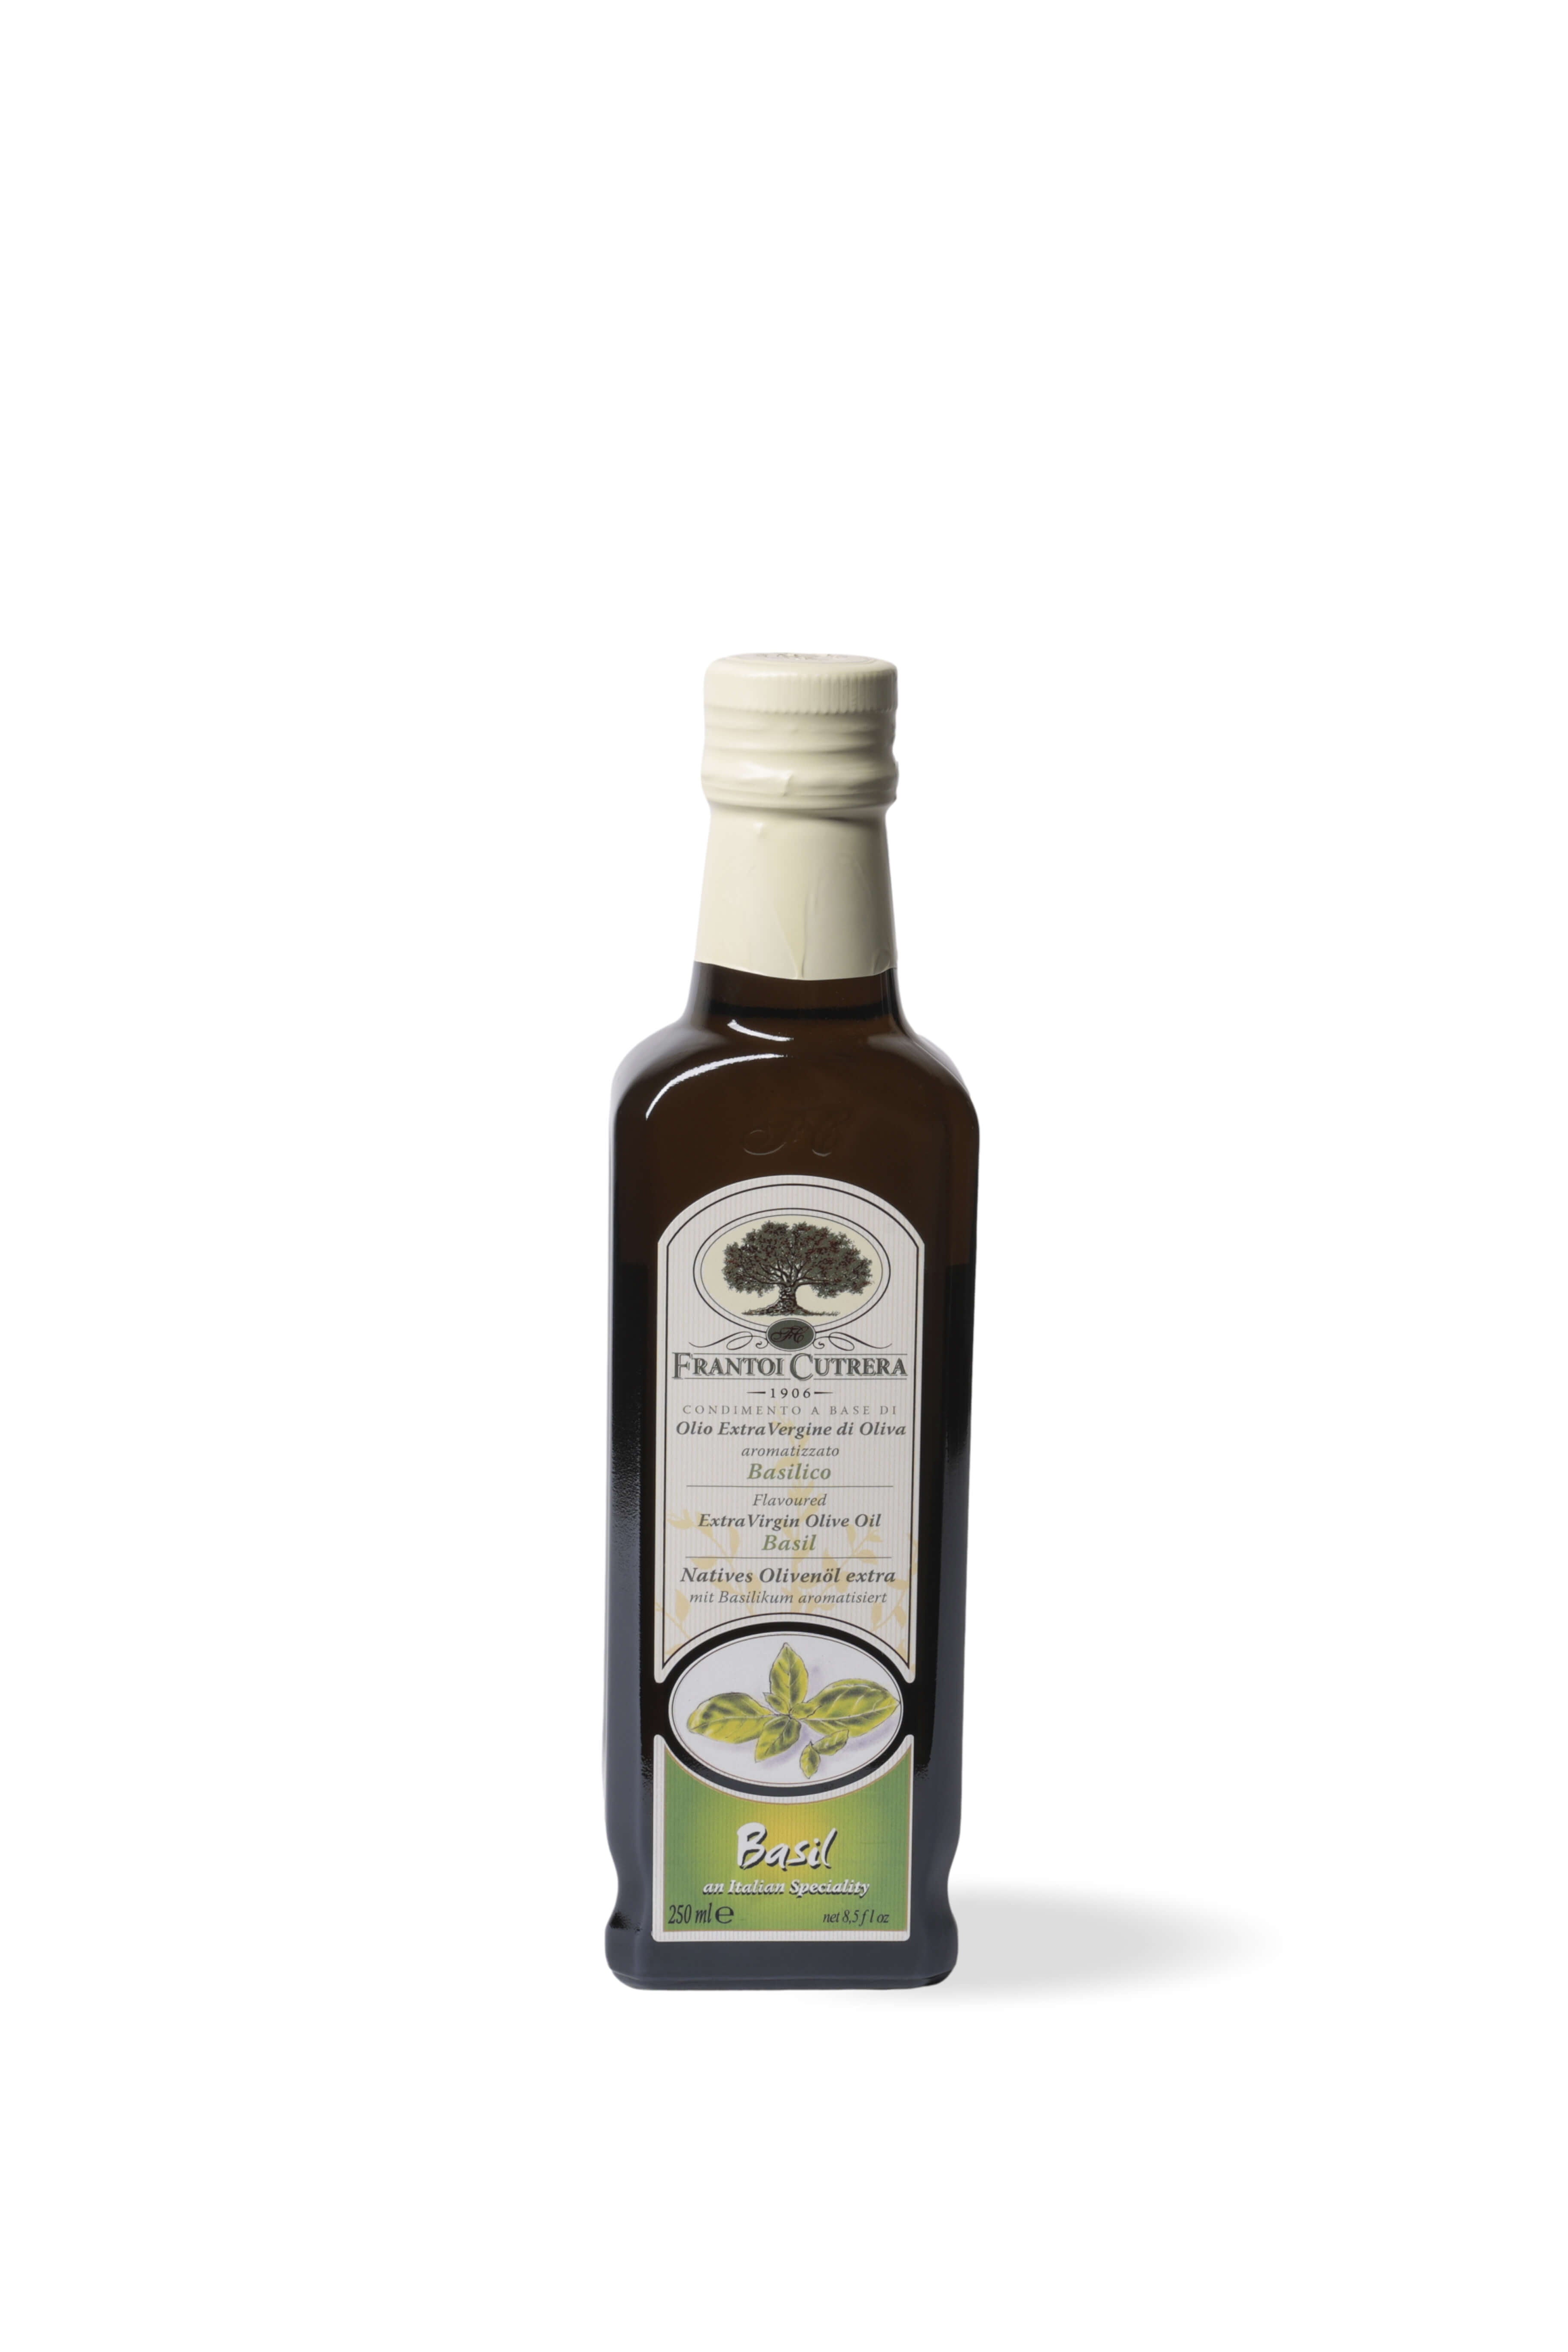 Extra virgin olive oil flavored with basil